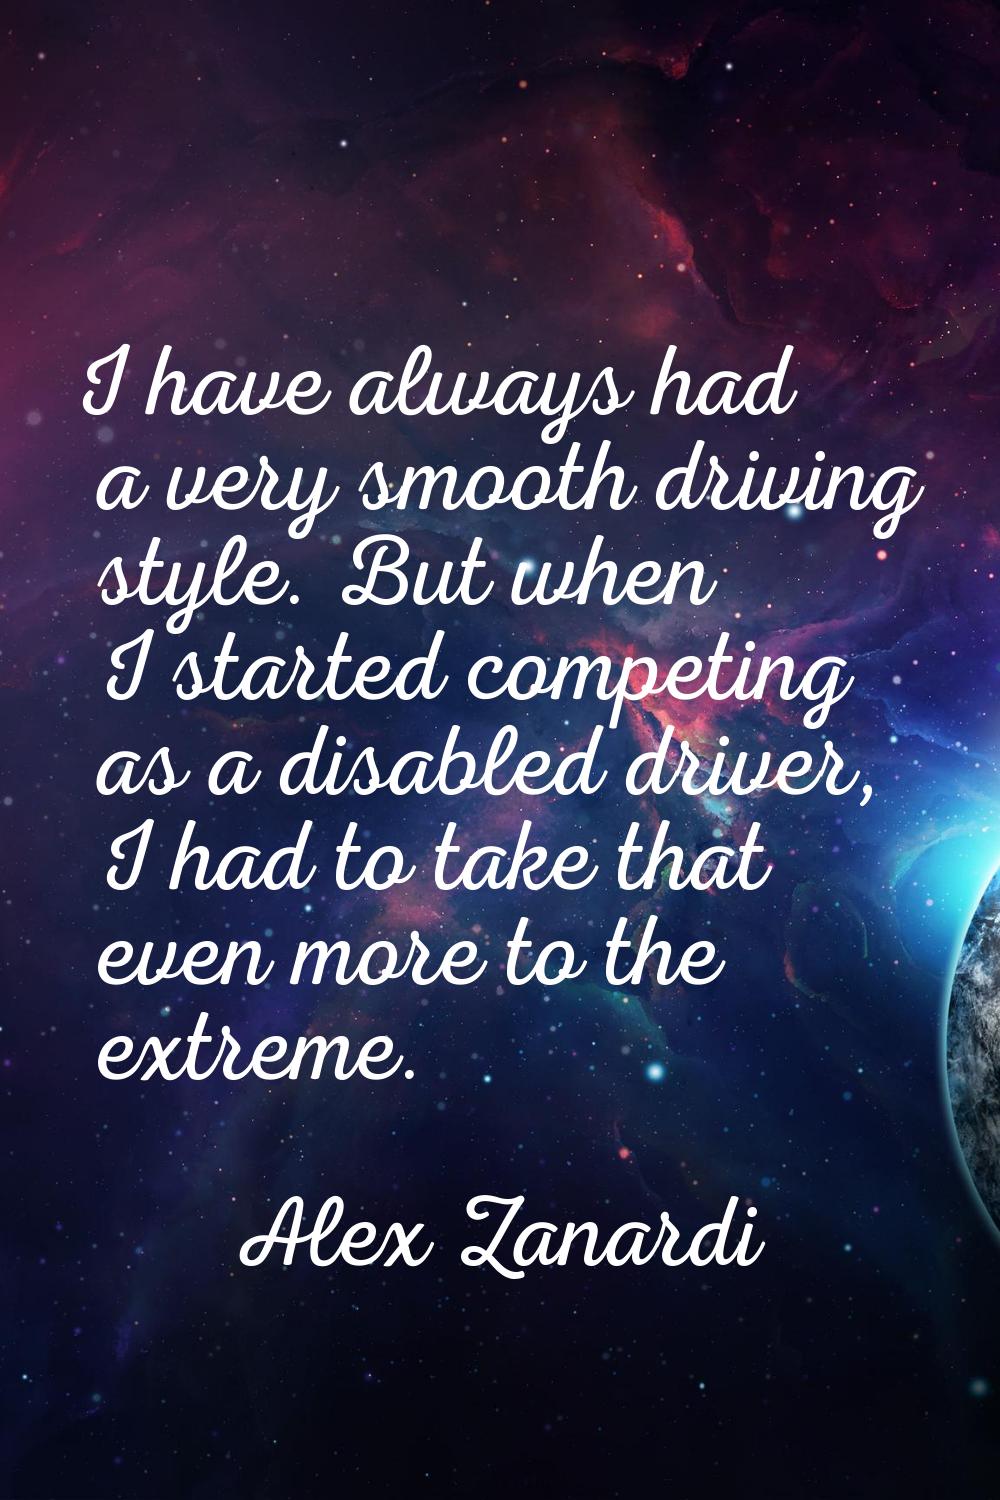 I have always had a very smooth driving style. But when I started competing as a disabled driver, I